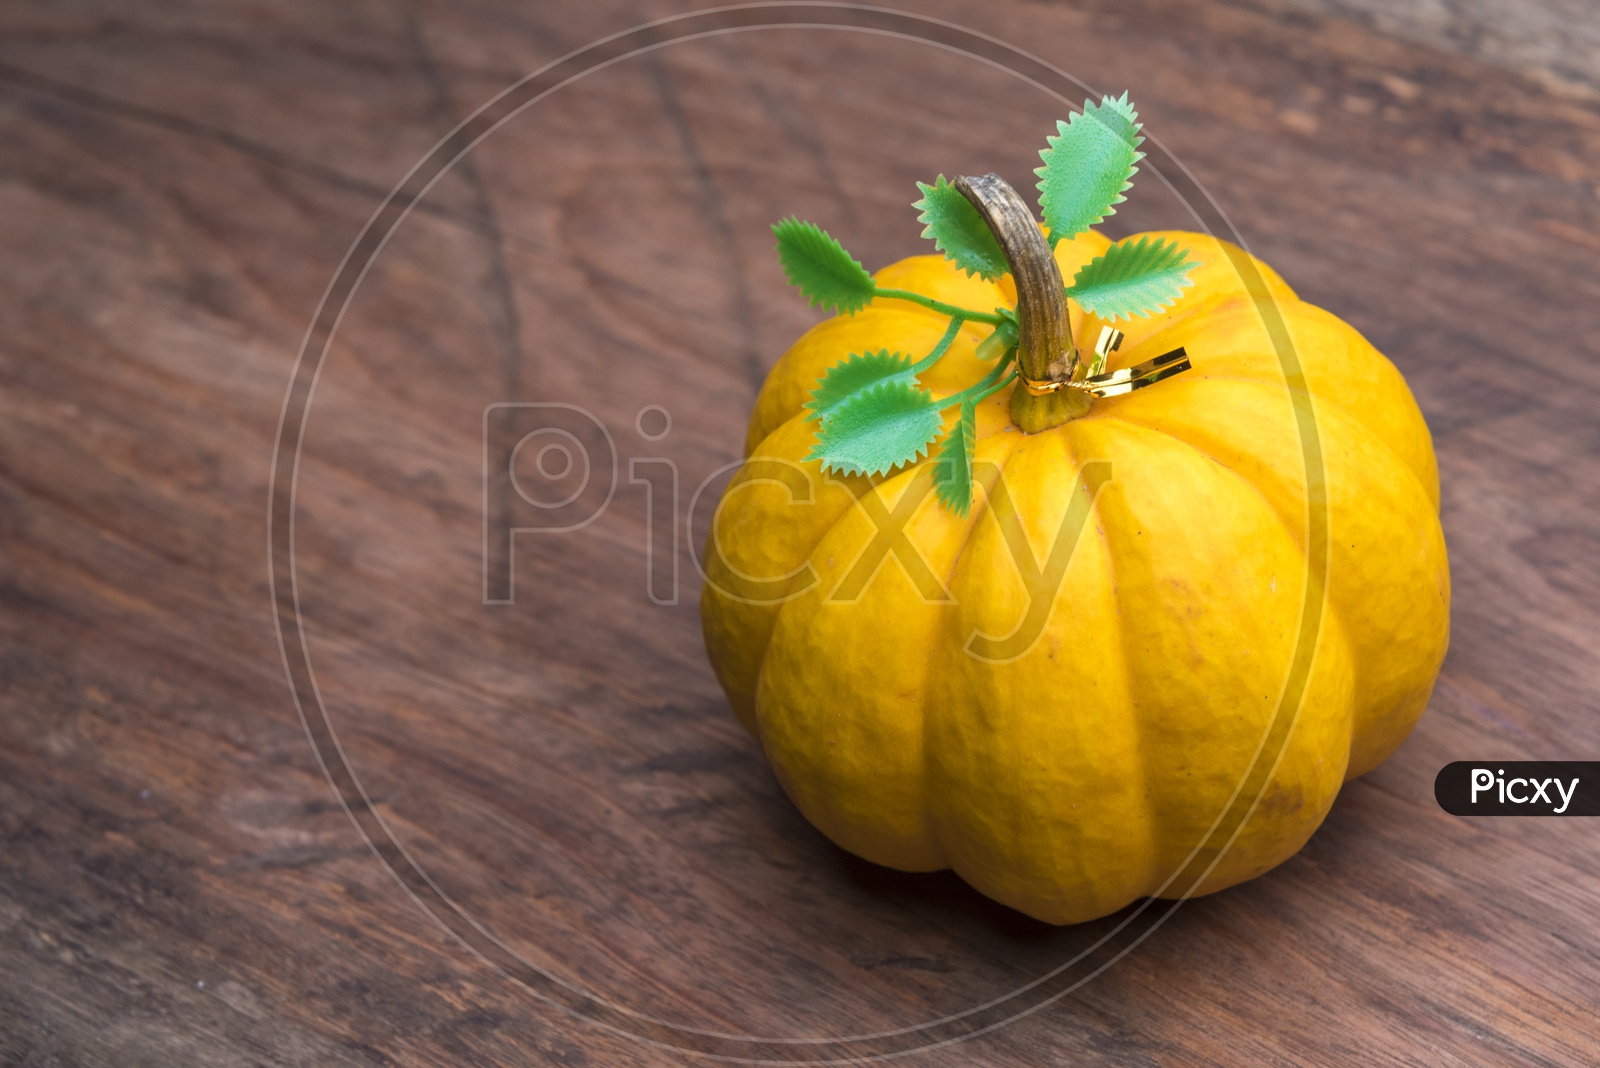 Giant pumpkin on the table